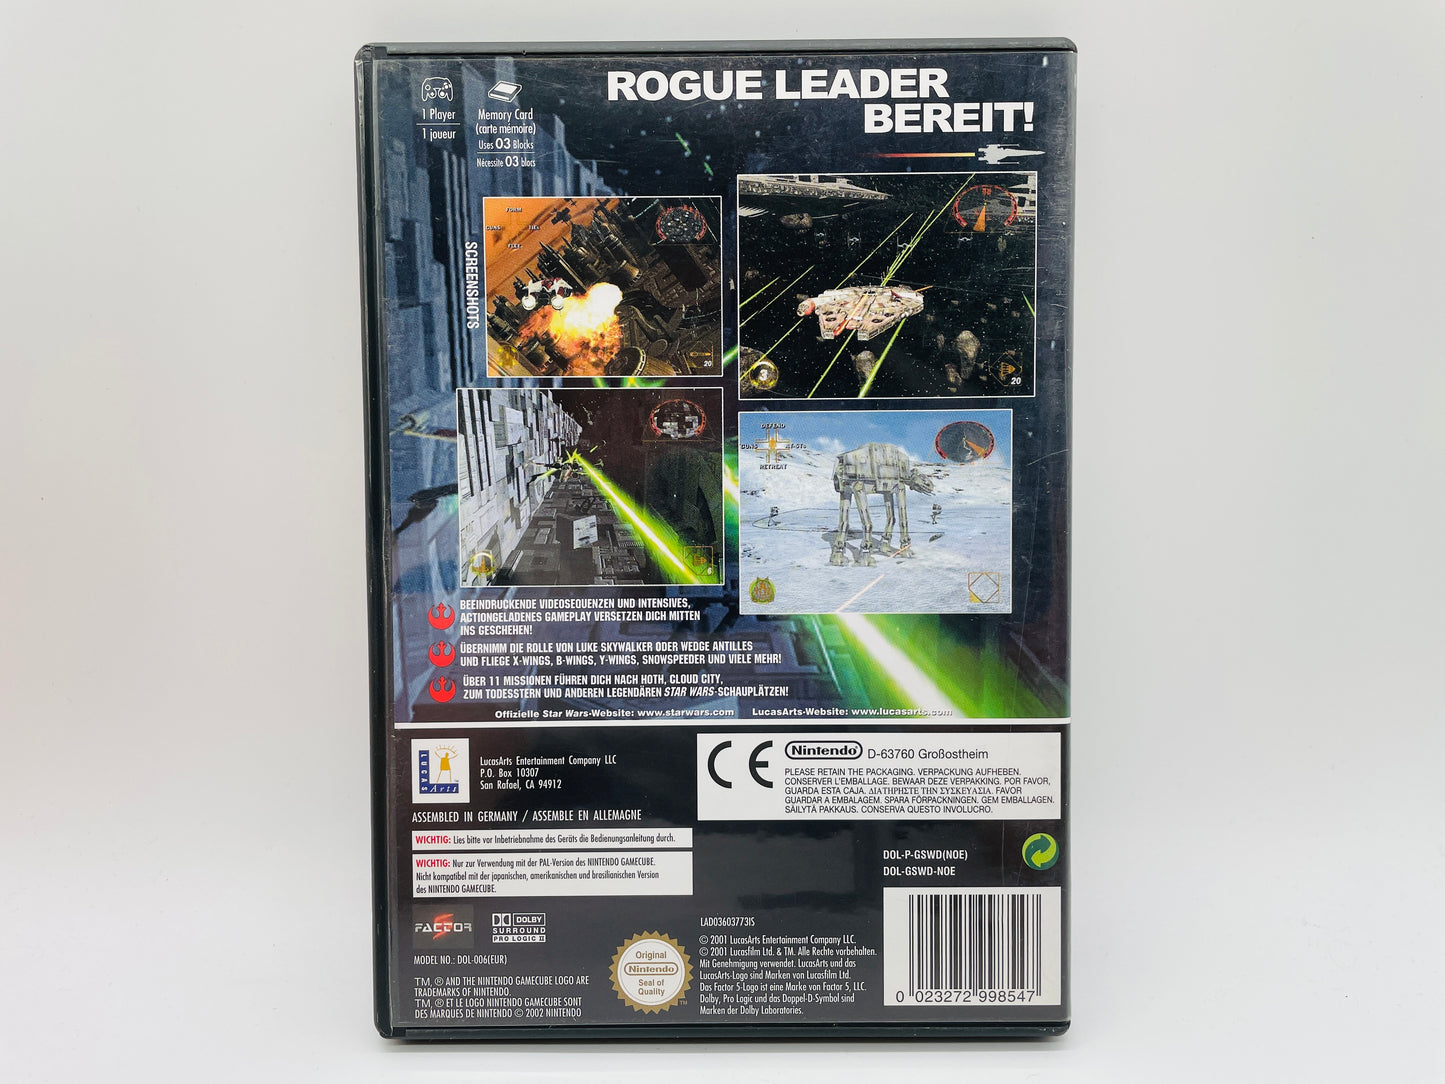 Star Wars Rogue Leader Rogue Squadron II [GCN]